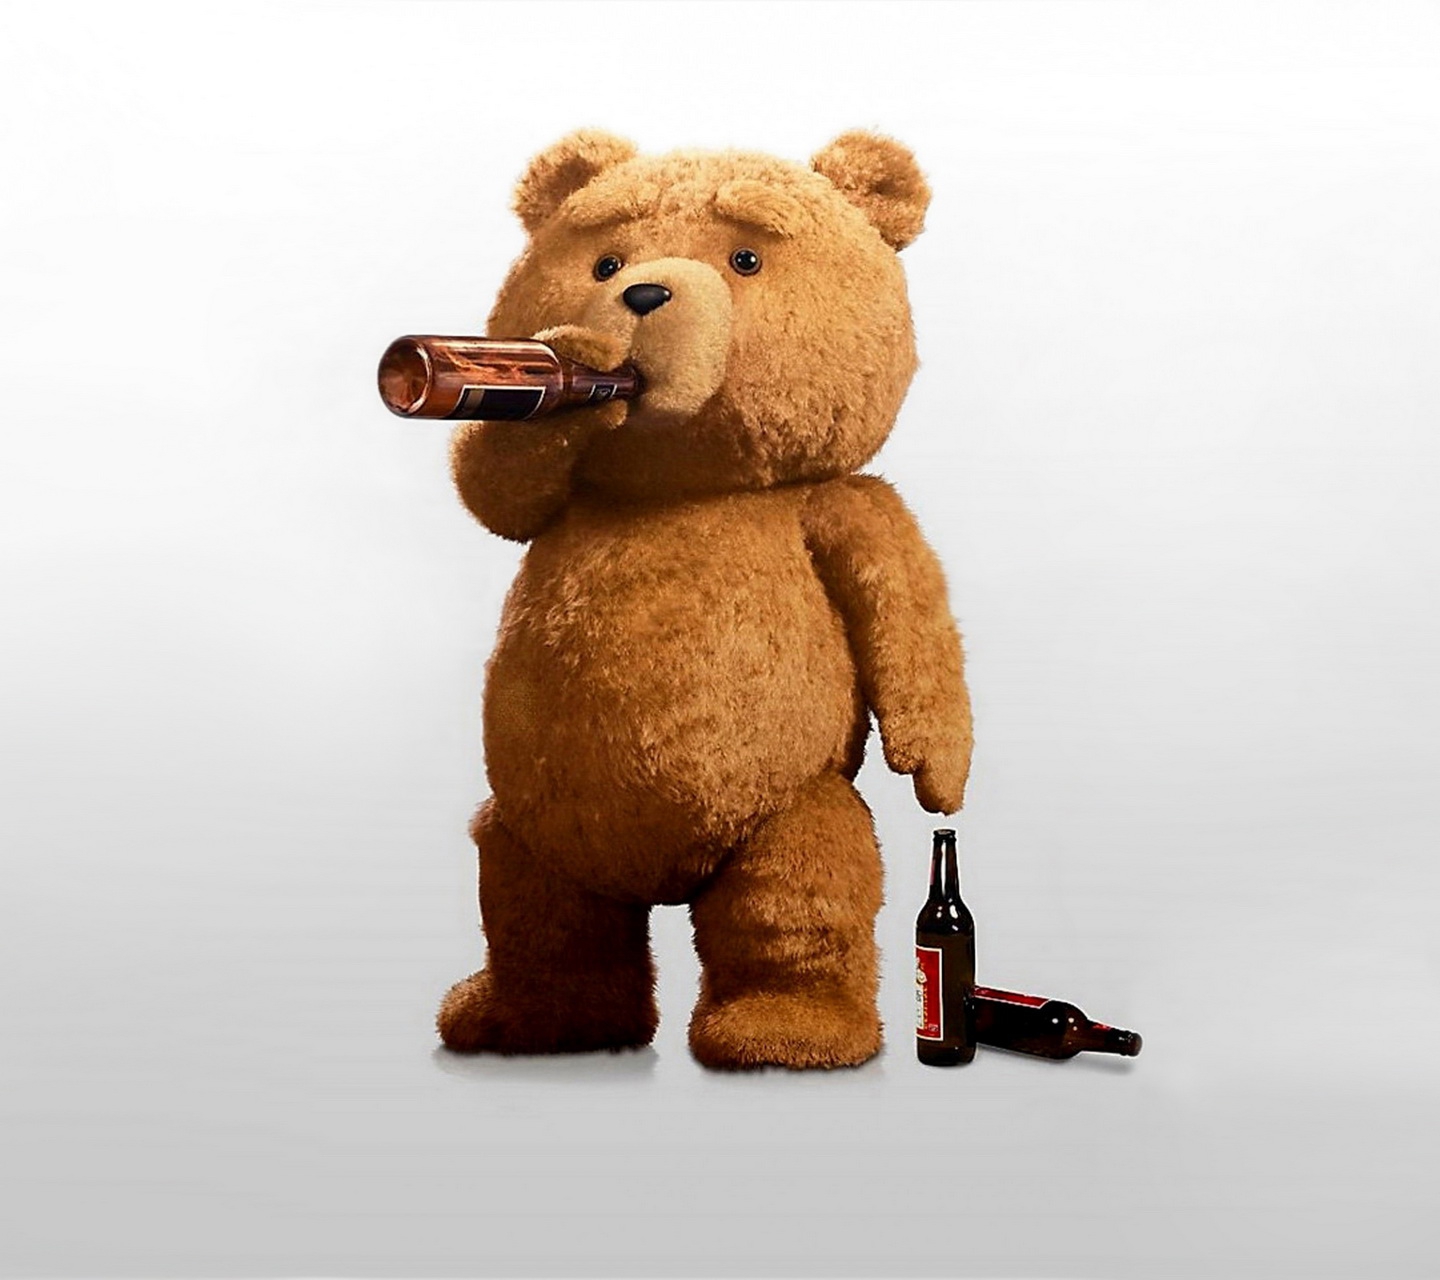 Images of Ted | 1440x1280